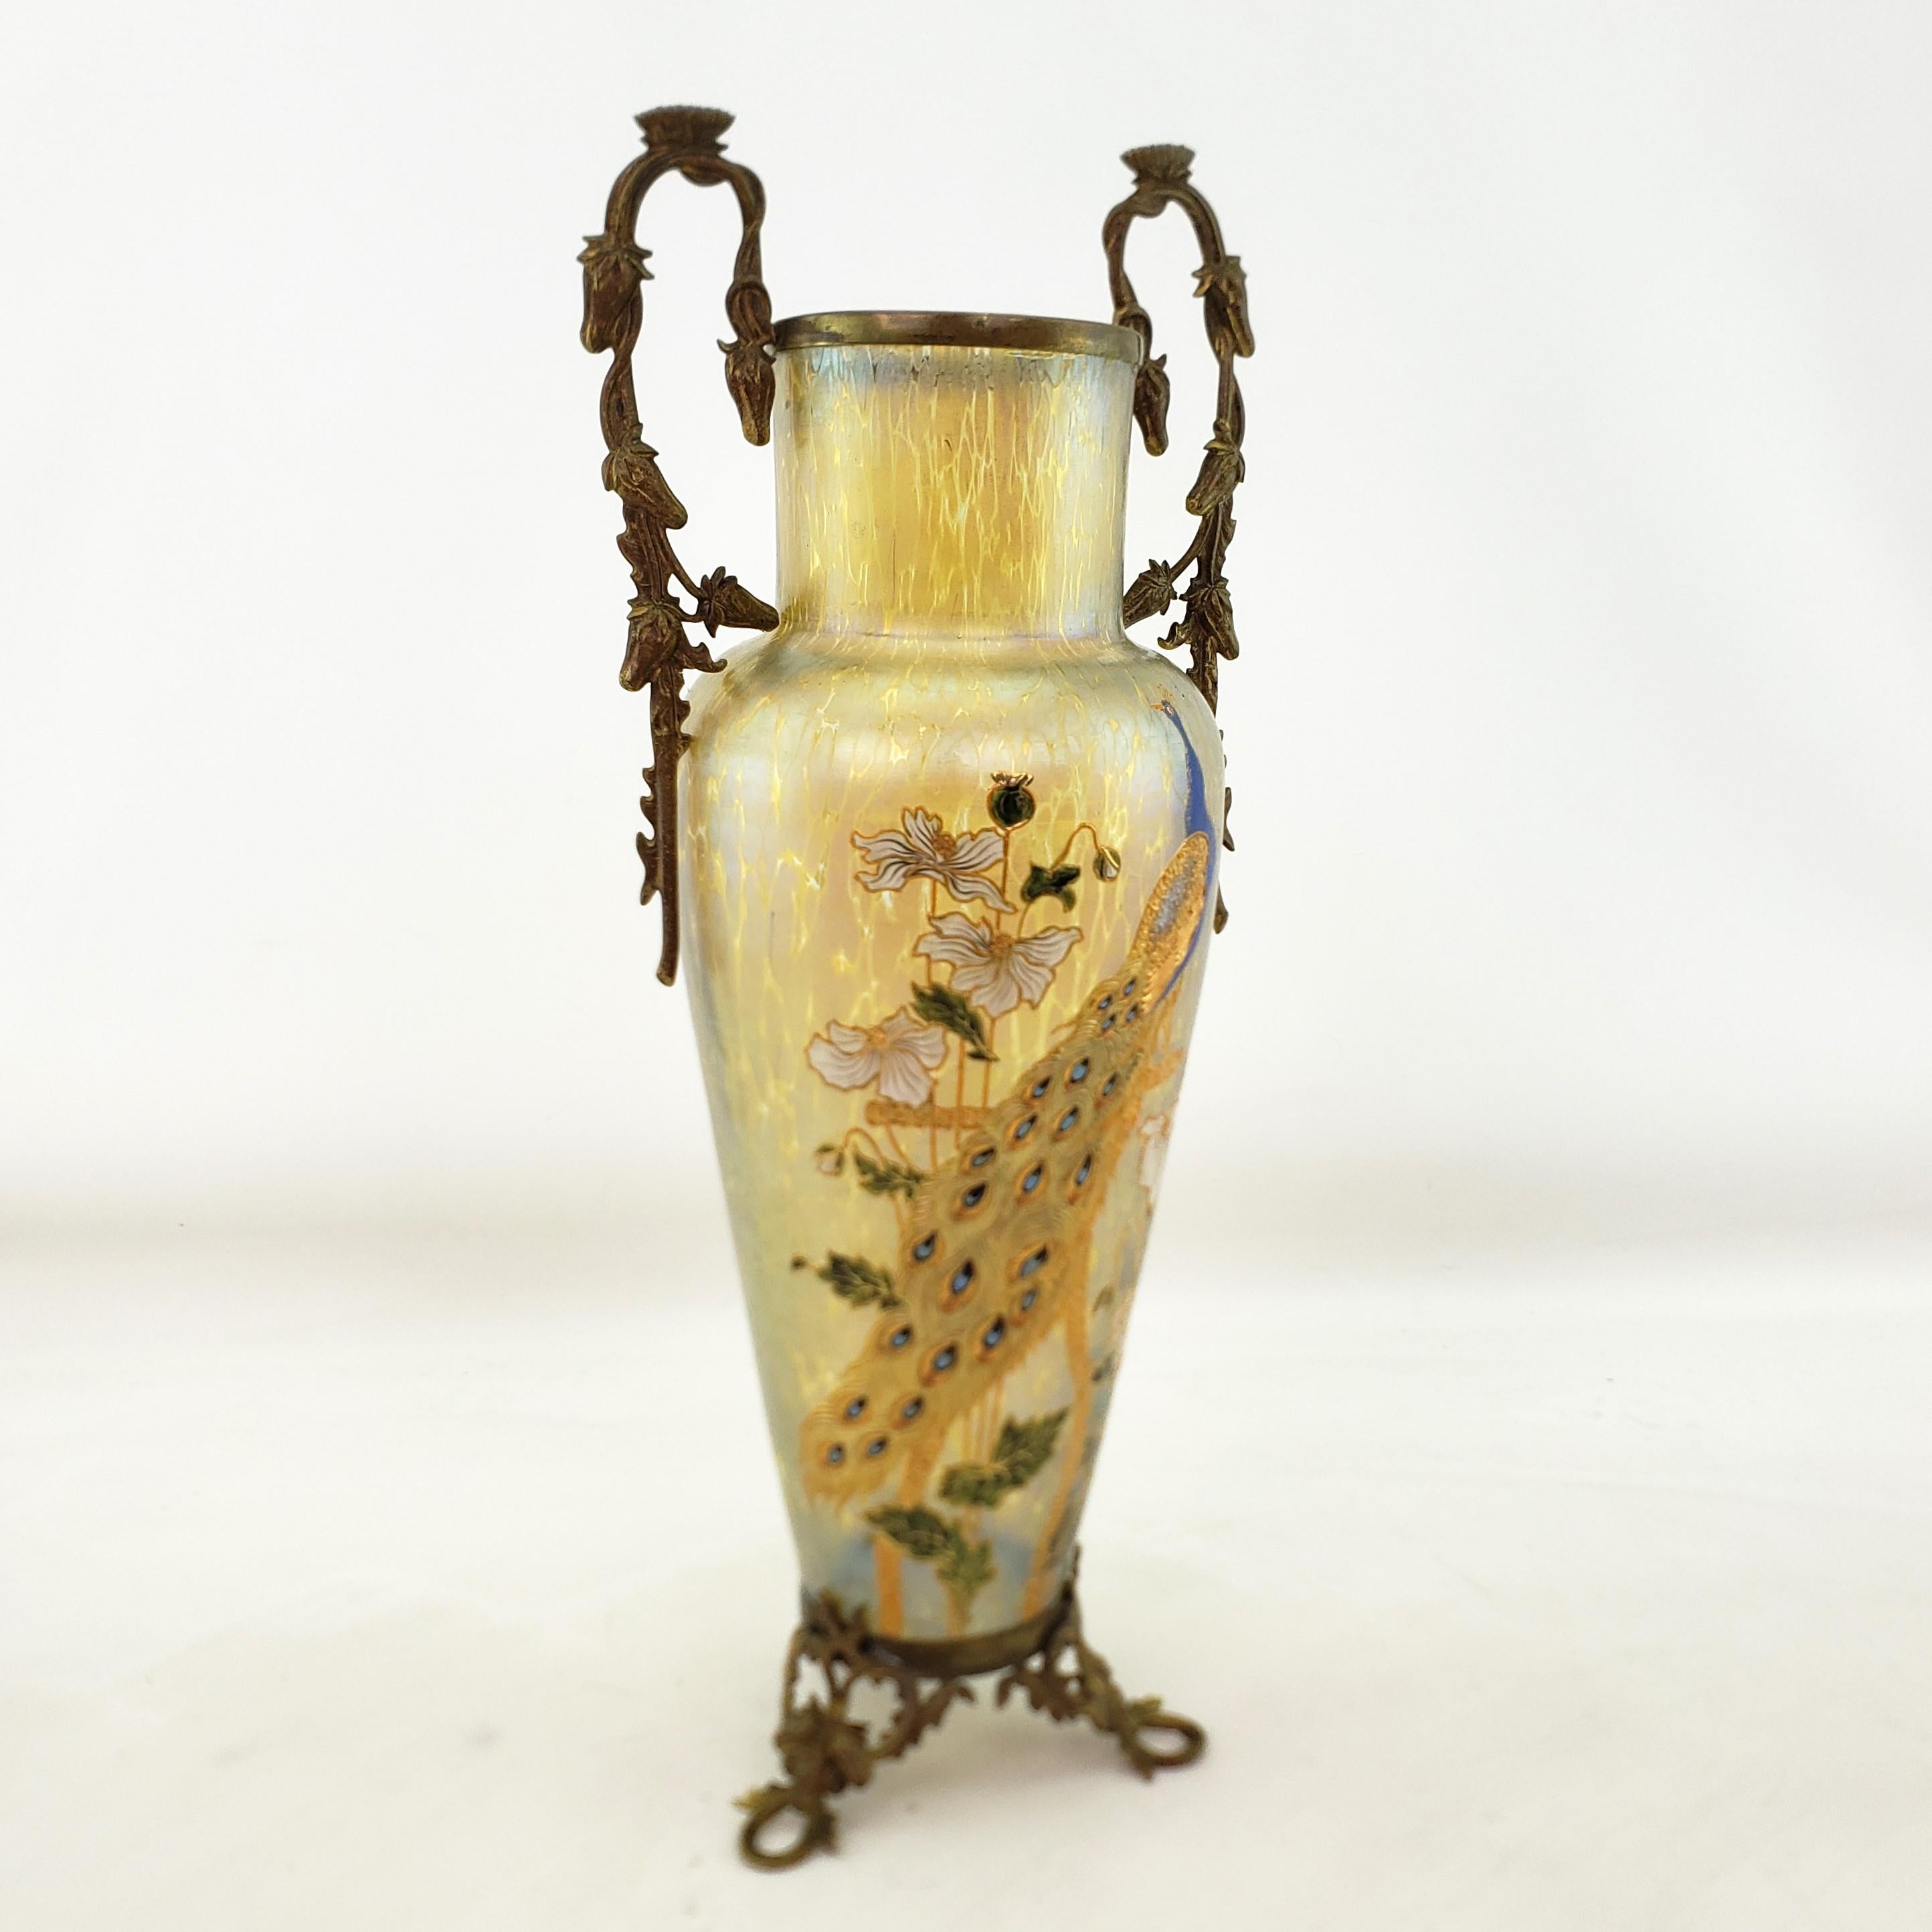 This antique vase is unsigned, but made by the Loetz glass factory of the Czech Replublic in approximately 1900 in the period Art Nouveau style. The vase is done in the gold irridescent 'Papillon' glass with a large hand painted enamel peacock with